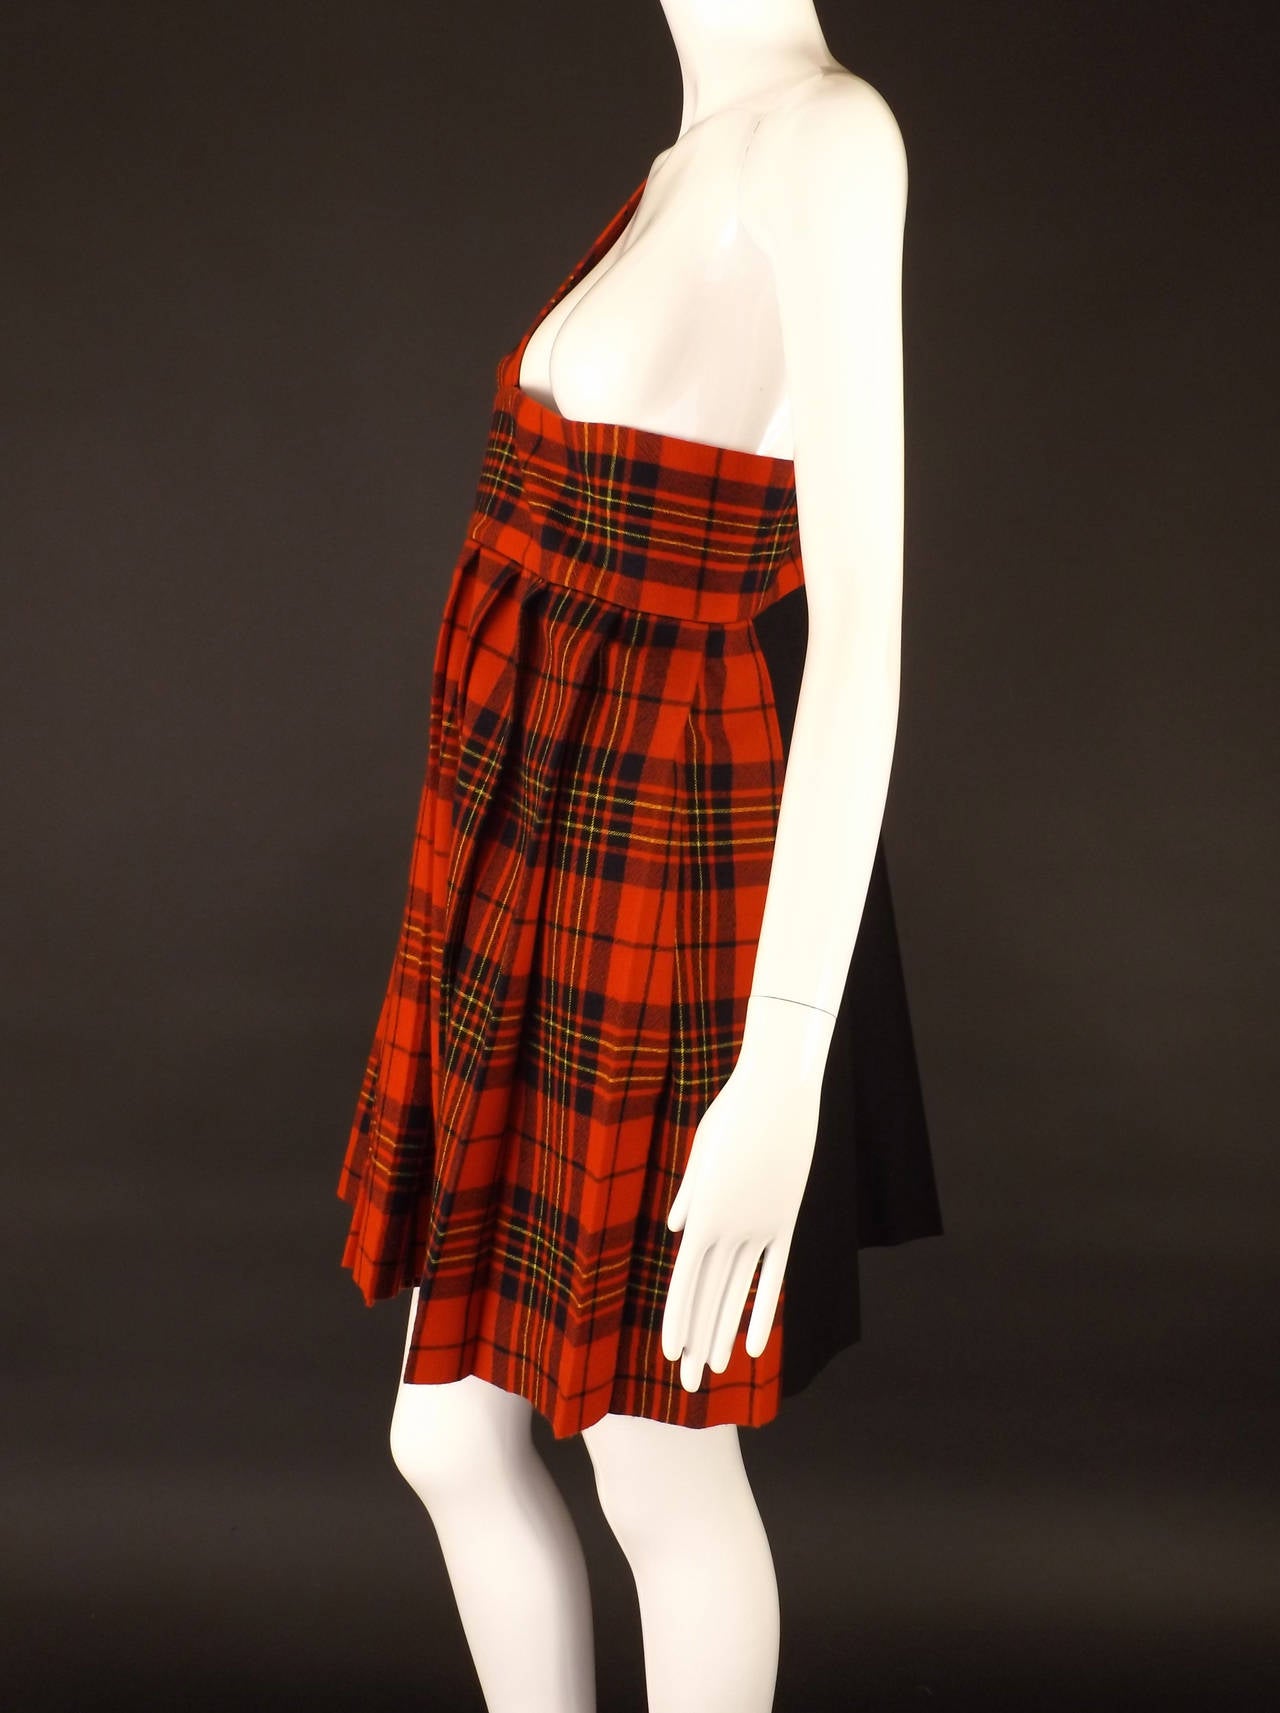 Fall 2011 Collection for Tricot. The one shoulder jumper is in red wool plaid with a contrasting flat black wool. Wide shoulder strap connects a wide band across the top. The skirt of the jumper is entirely in side pleats. No closures and unlined.